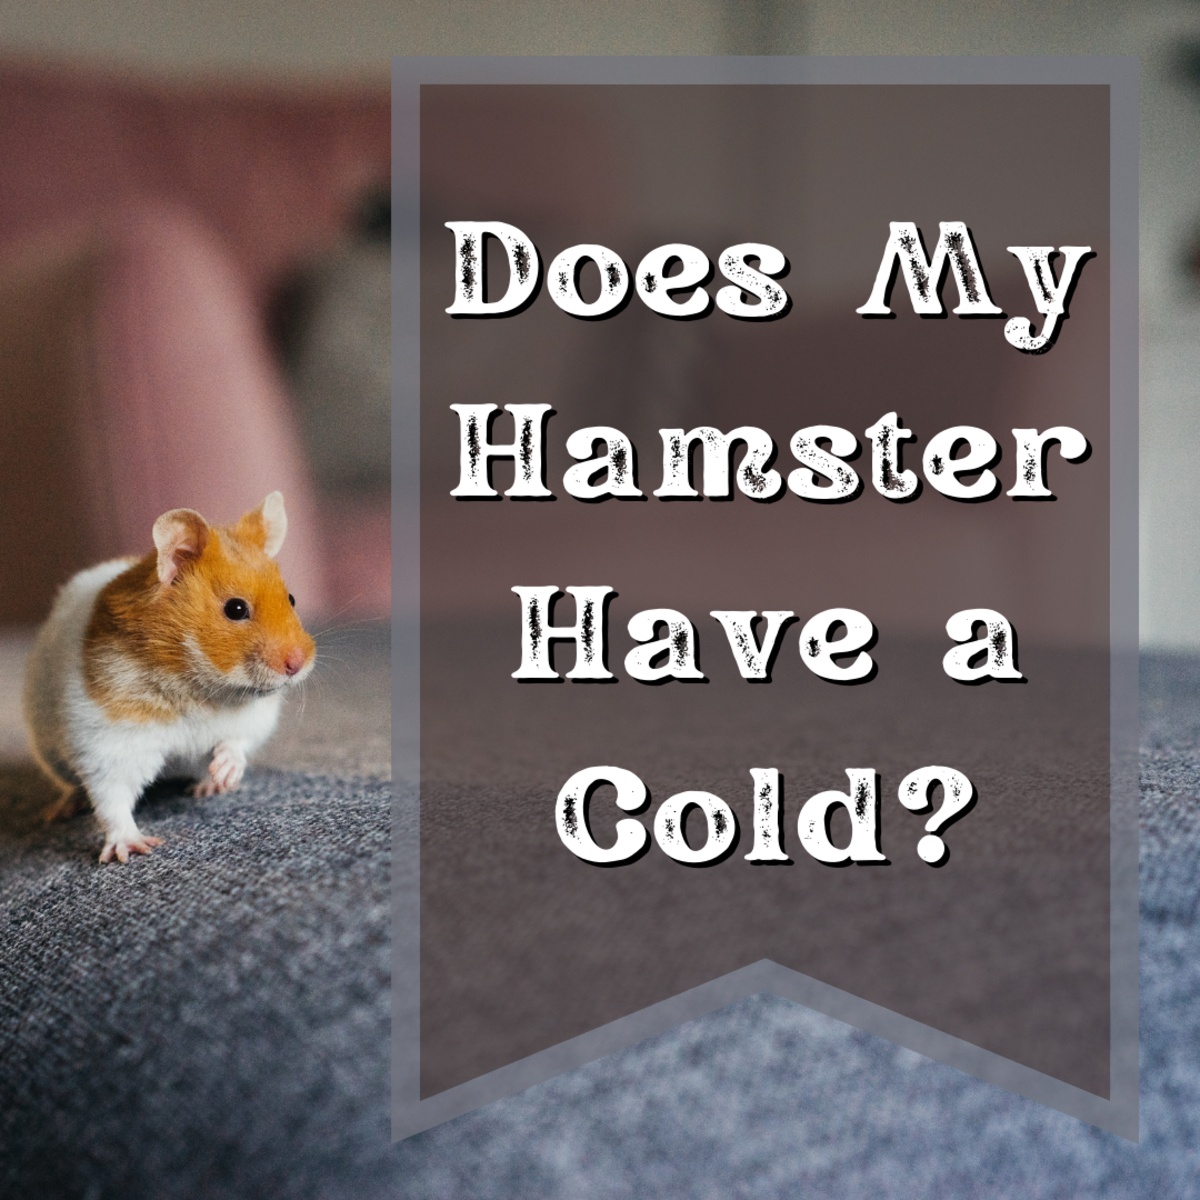 Why Is My Hamster Sneezing? Signs of the Common Cold in a Hamster